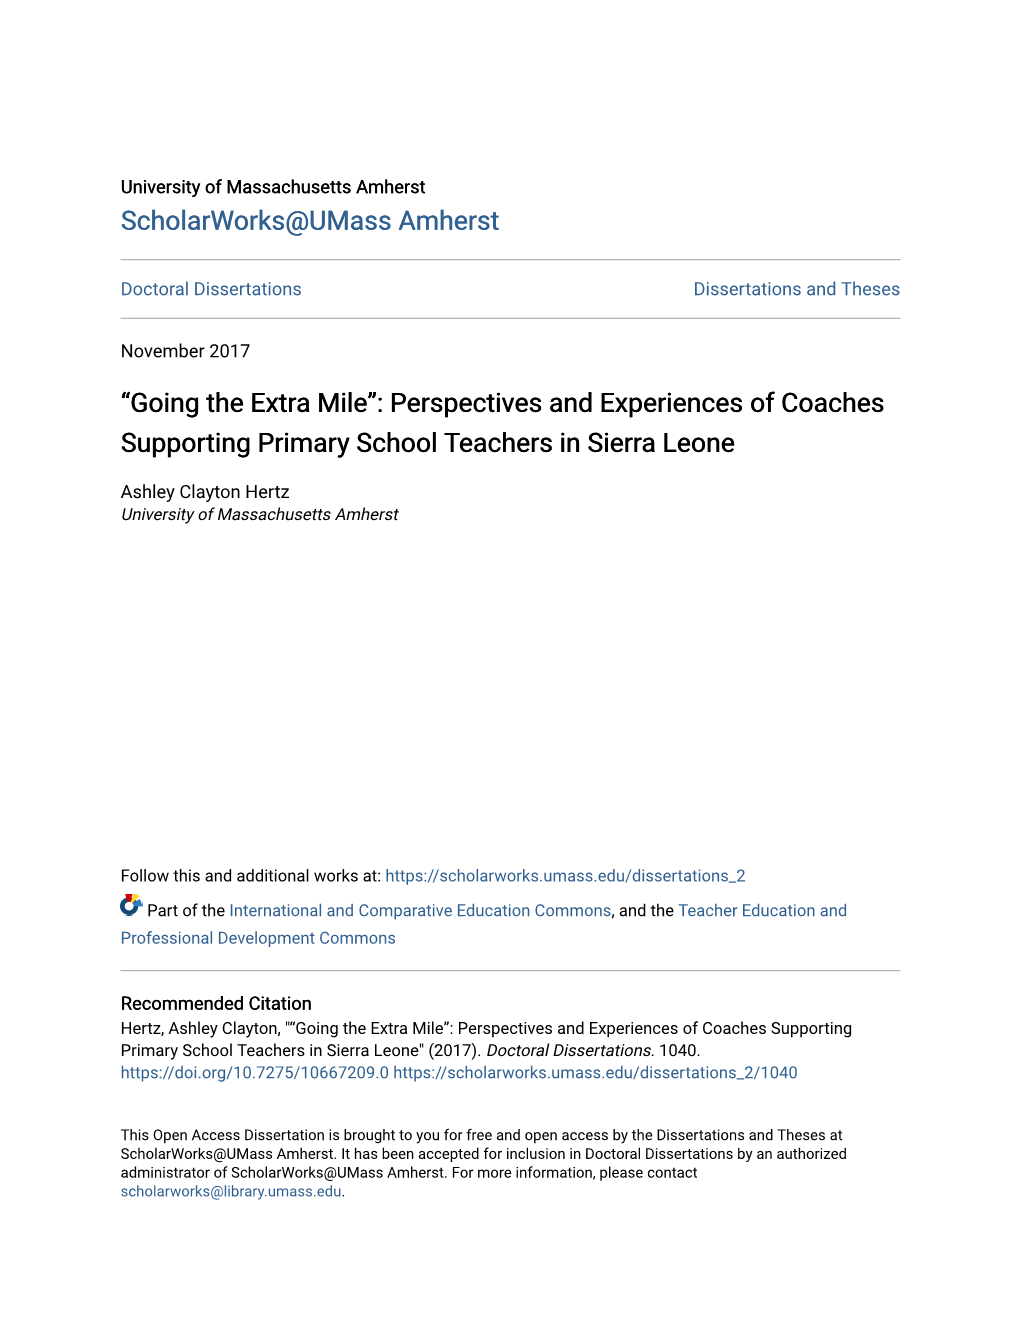 “Going the Extra Mile”: Perspectives and Experiences of Coaches Supporting Primary School Teachers in Sierra Leone